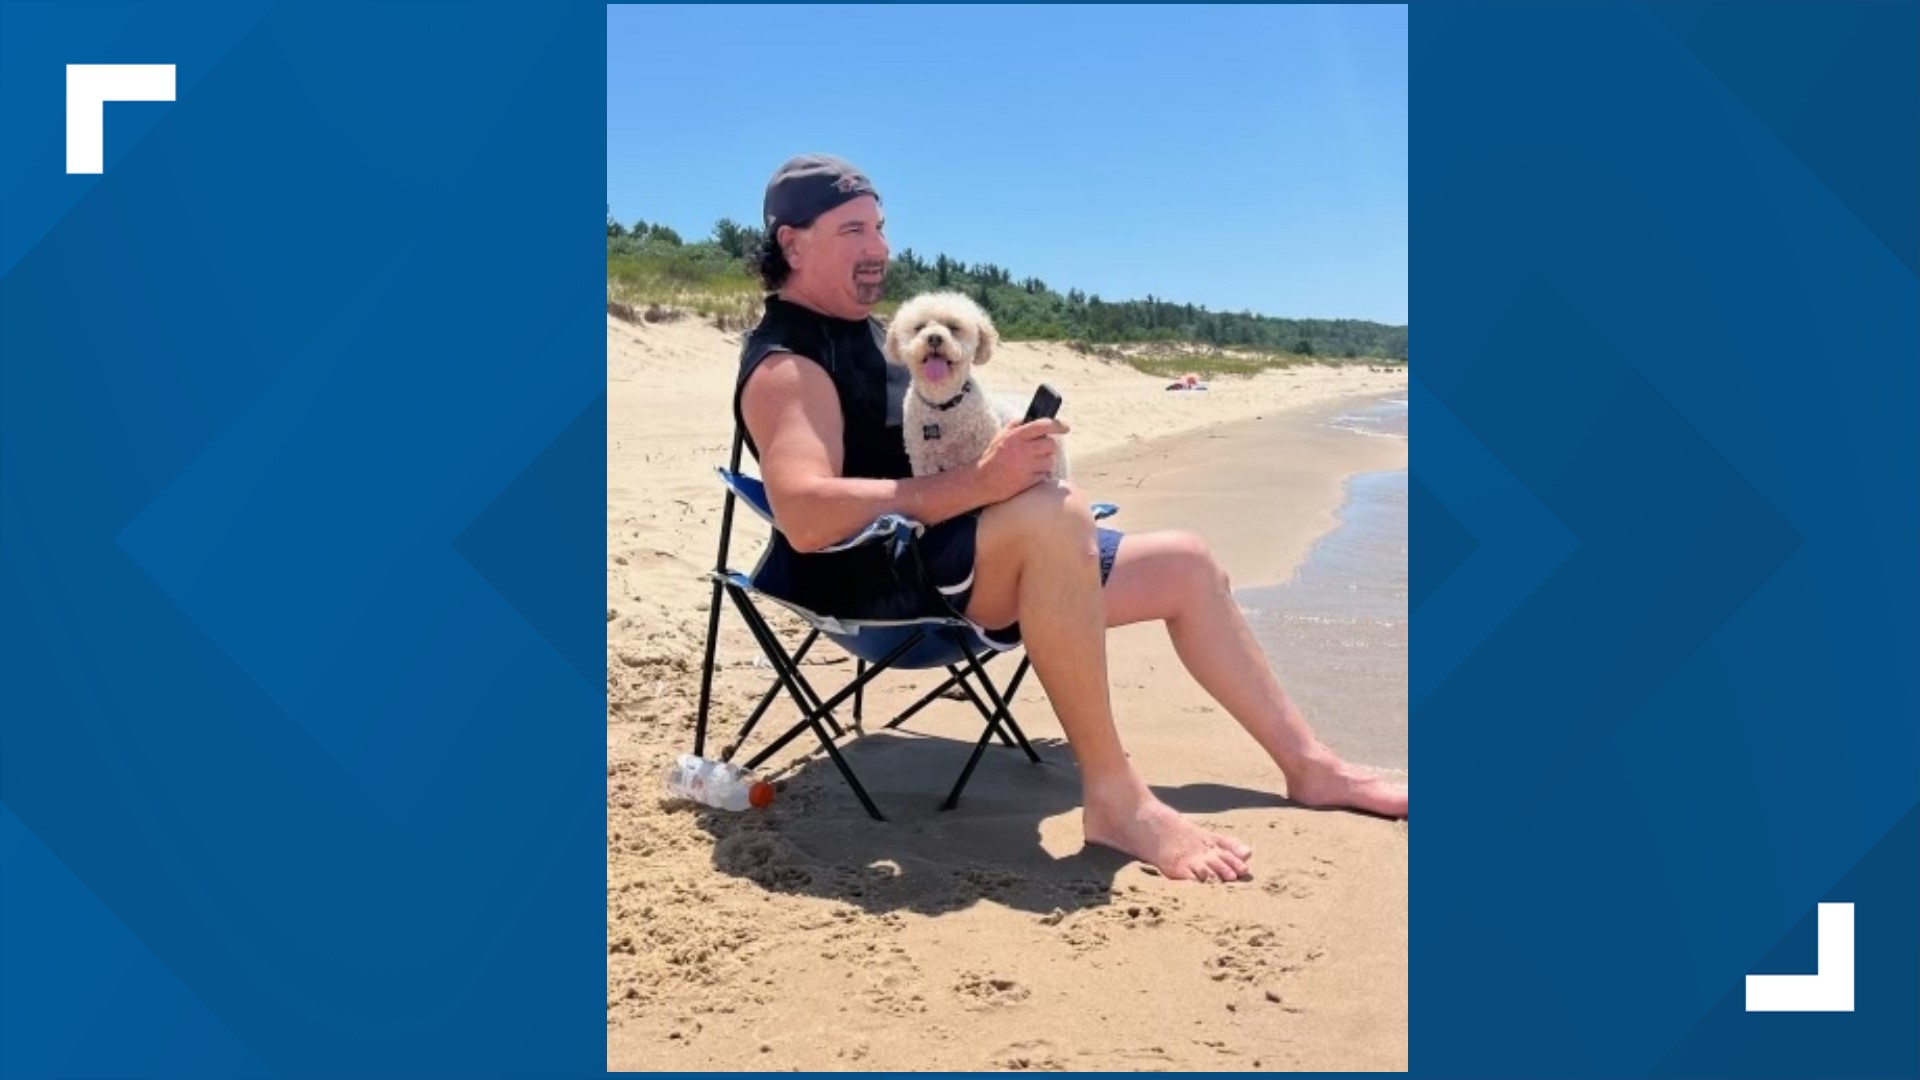 Tom O'Malley is devastated after his dog has been missing for almost a week, nearly a year after the passing of his fiancé.